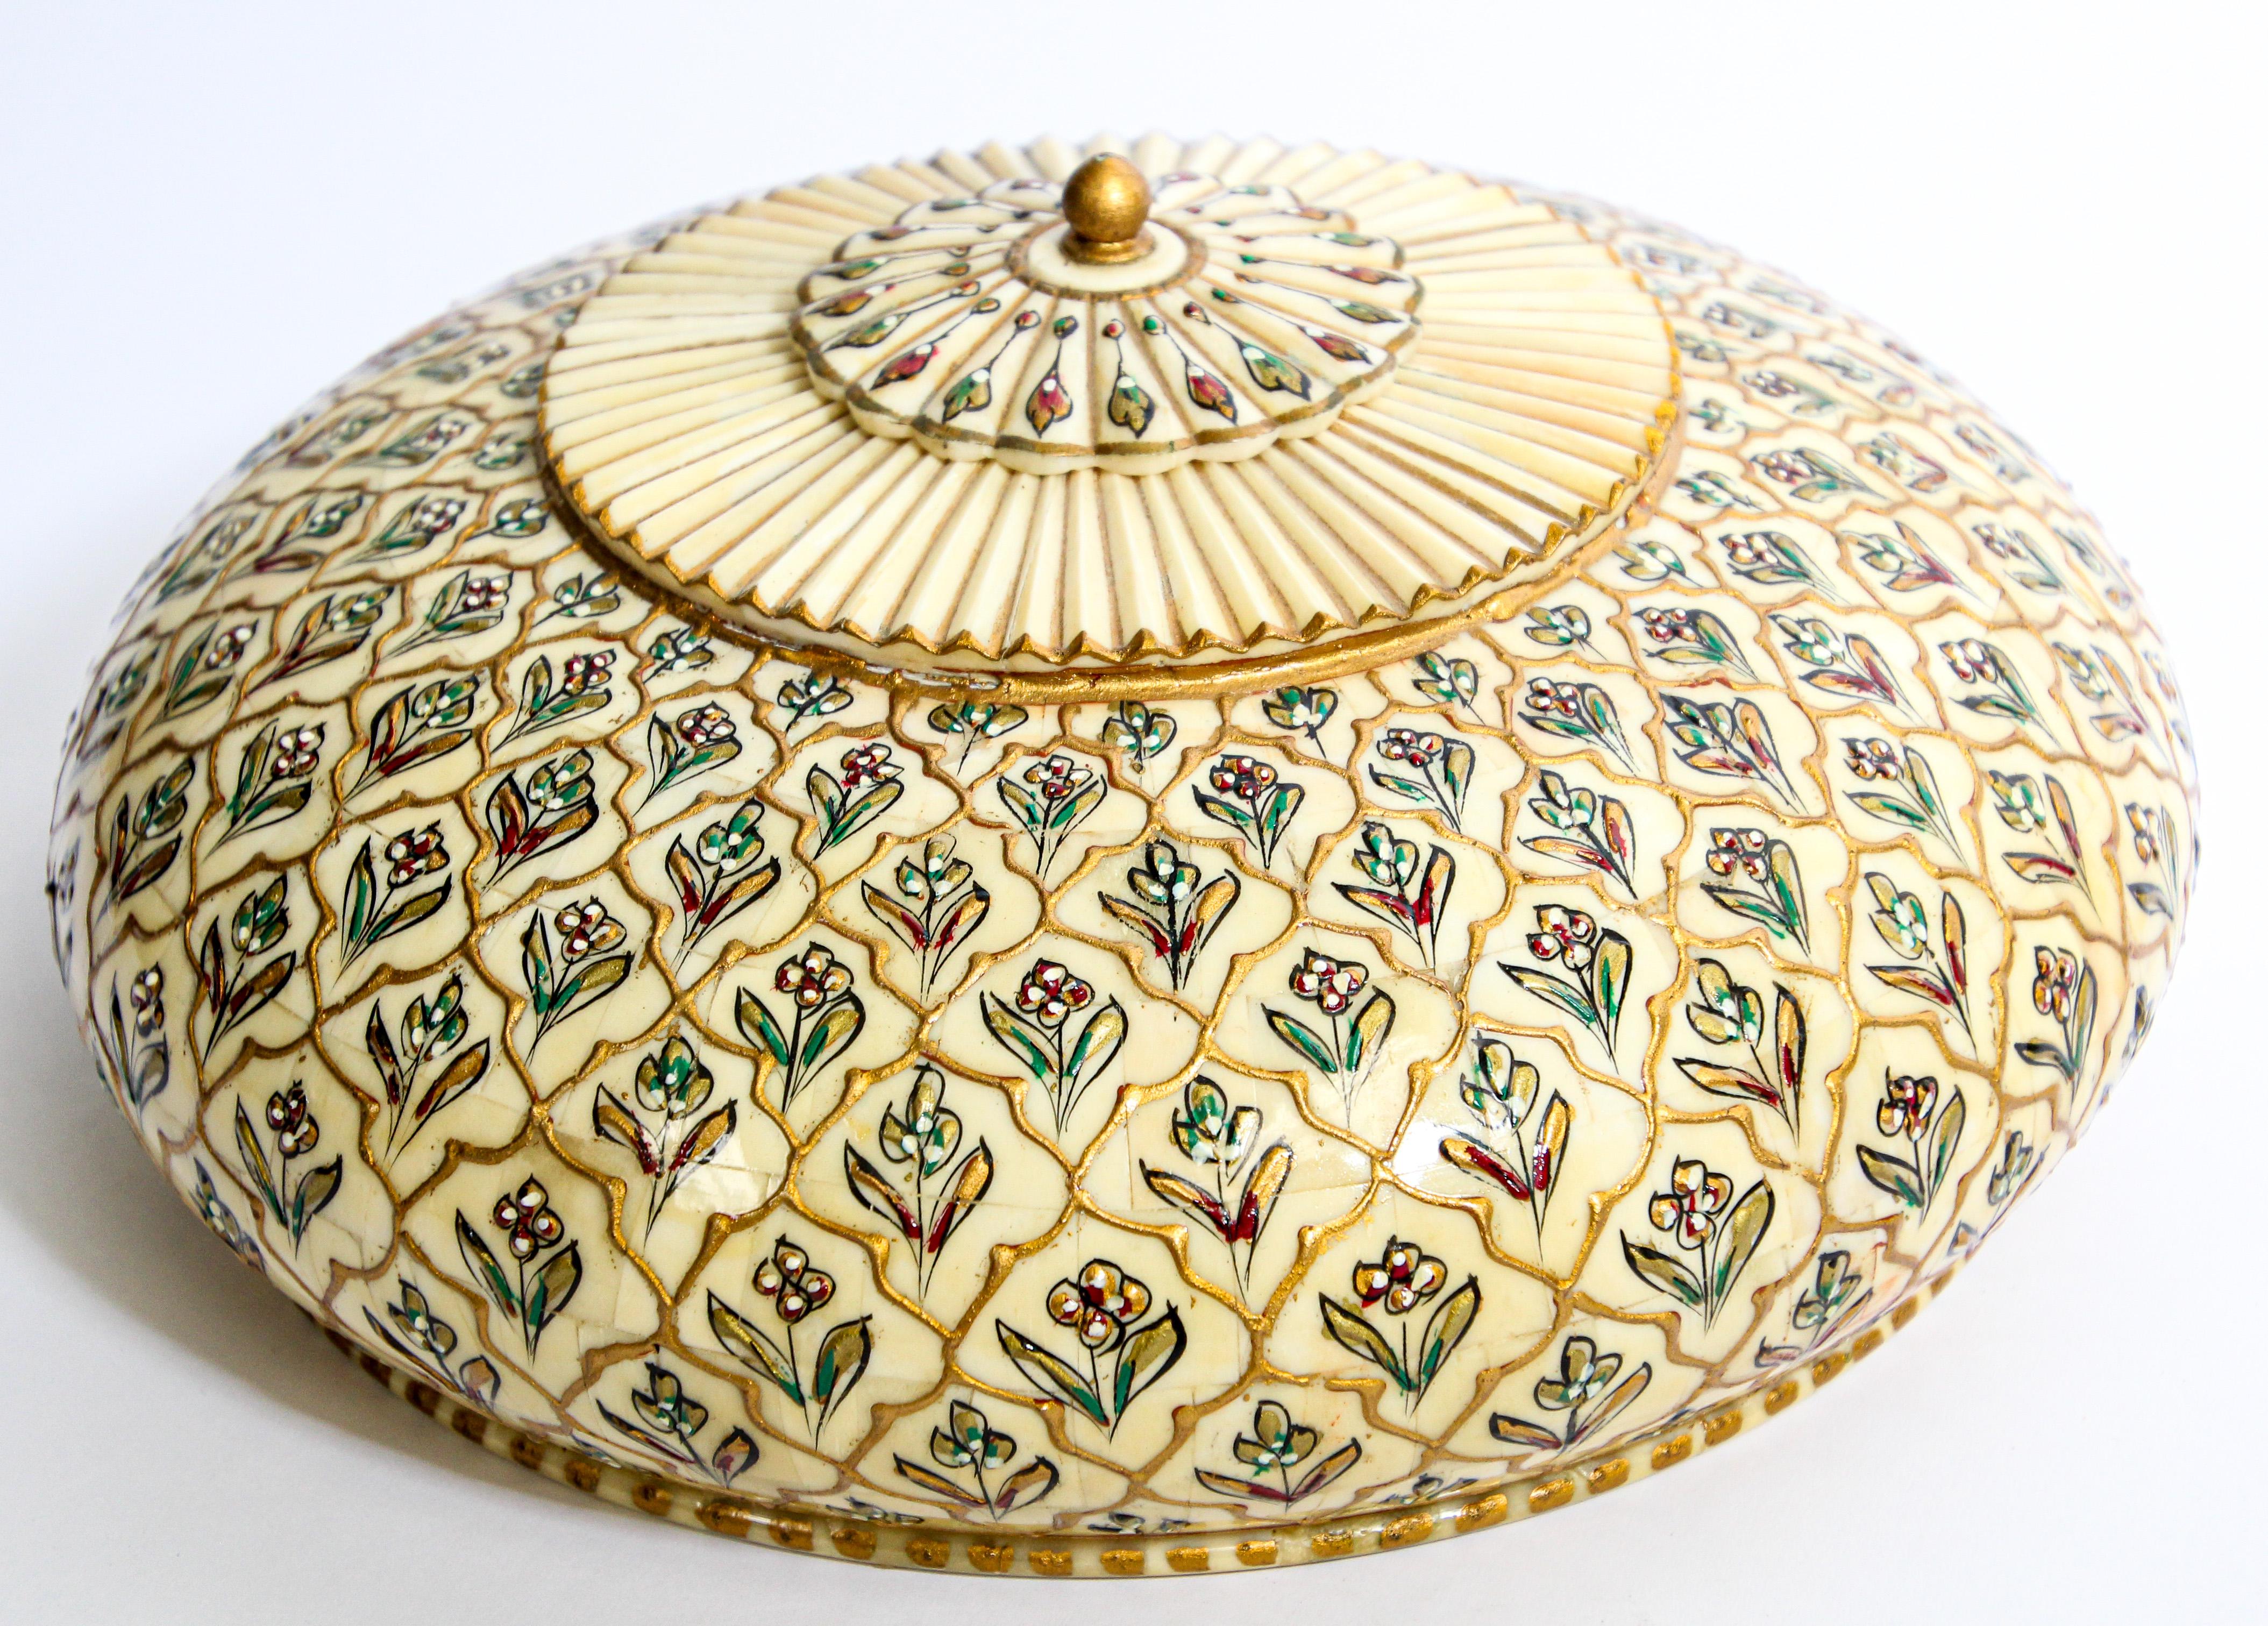 Wood Collectible Opium Container Mughal Art Round Lidded Box For Sale